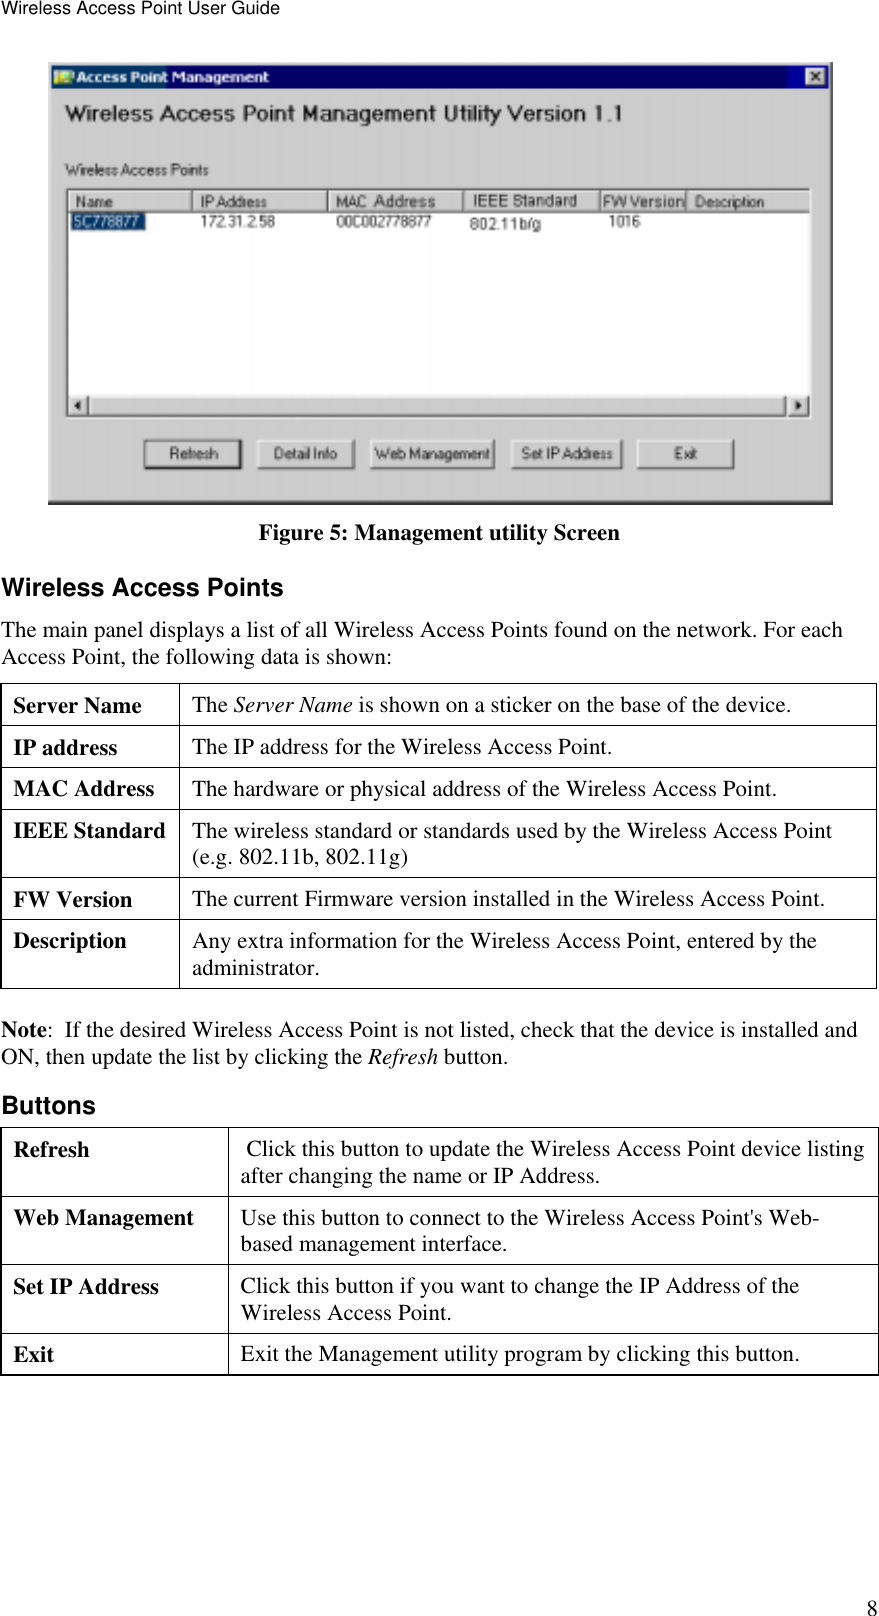 Wireless Access Point User Guide 8  Figure 5: Management utility Screen Wireless Access Points The main panel displays a list of all Wireless Access Points found on the network. For each Access Point, the following data is shown: Server Name The Server Name is shown on a sticker on the base of the device. IP address  The IP address for the Wireless Access Point. MAC Address The hardware or physical address of the Wireless Access Point. IEEE Standard The wireless standard or standards used by the Wireless Access Point (e.g. 802.11b, 802.11g) FW Version The current Firmware version installed in the Wireless Access Point. Description Any extra information for the Wireless Access Point, entered by the administrator. Note:  If the desired Wireless Access Point is not listed, check that the device is installed and ON, then update the list by clicking the Refresh button. Buttons Refresh  Click this button to update the Wireless Access Point device listing after changing the name or IP Address. Web Management Use this button to connect to the Wireless Access Point&apos;s Web-based management interface. Set IP Address Click this button if you want to change the IP Address of the Wireless Access Point. Exit Exit the Management utility program by clicking this button. 